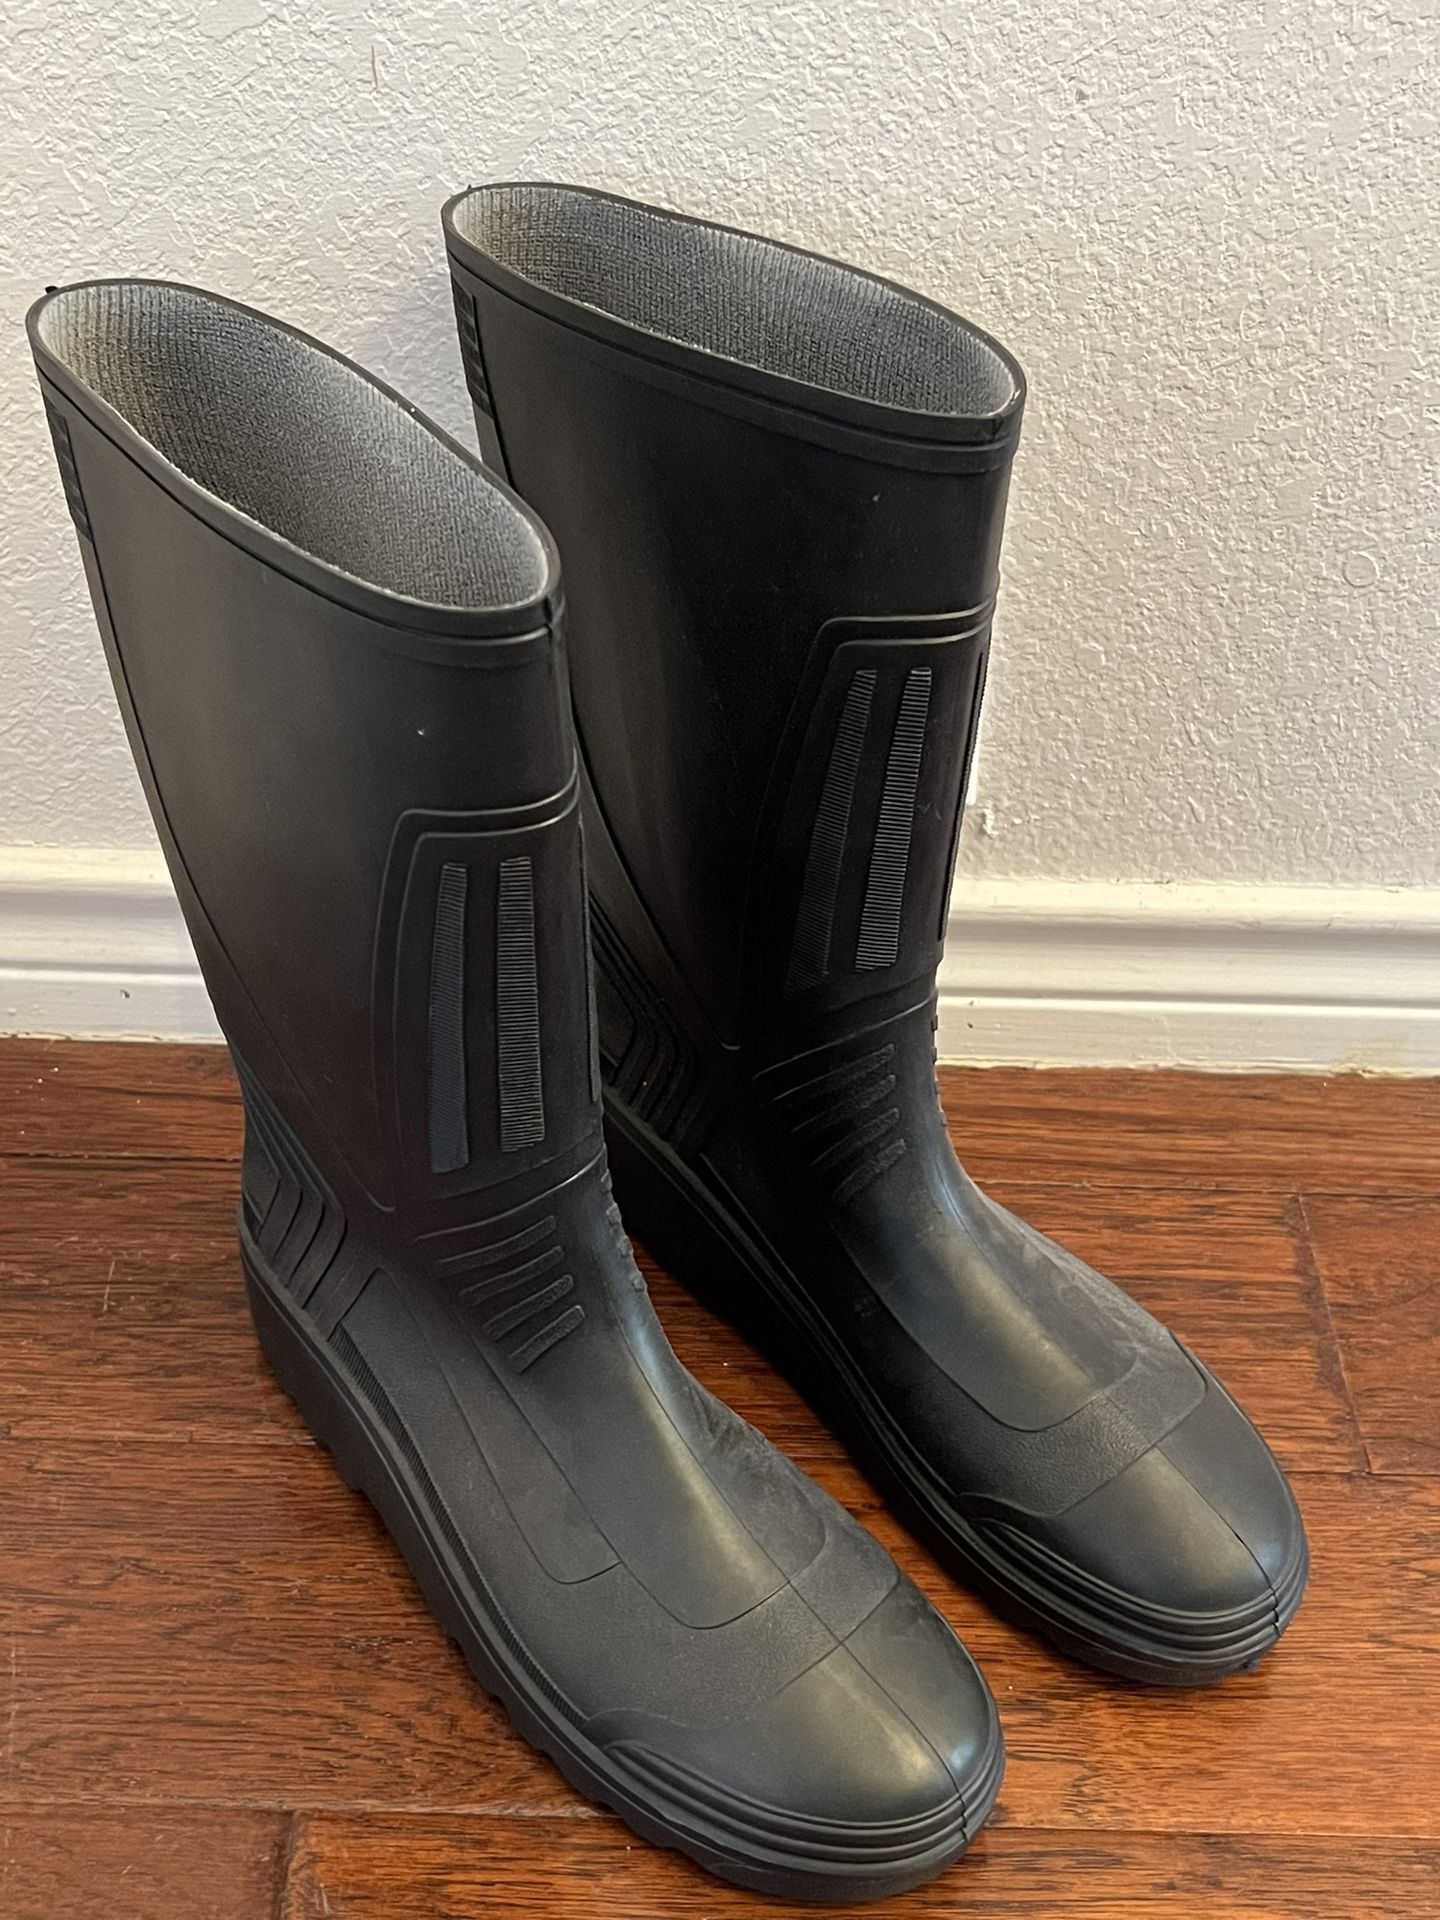 A Brand new of Waterproof Rubber Rain Boots Water Sho. Made in Italy.